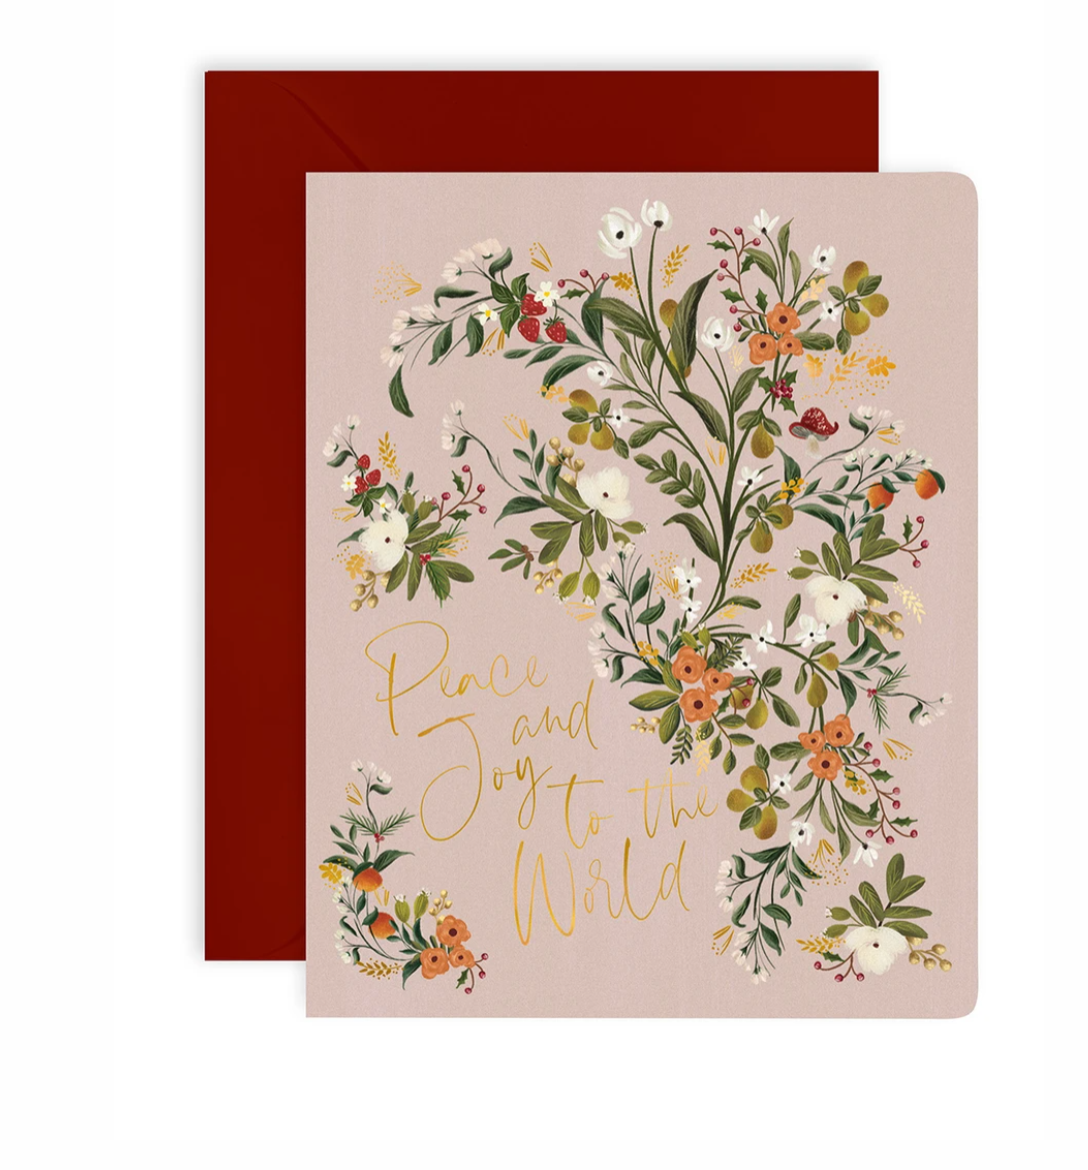 'Peace and Joy to the World' Greeting Card - Pears